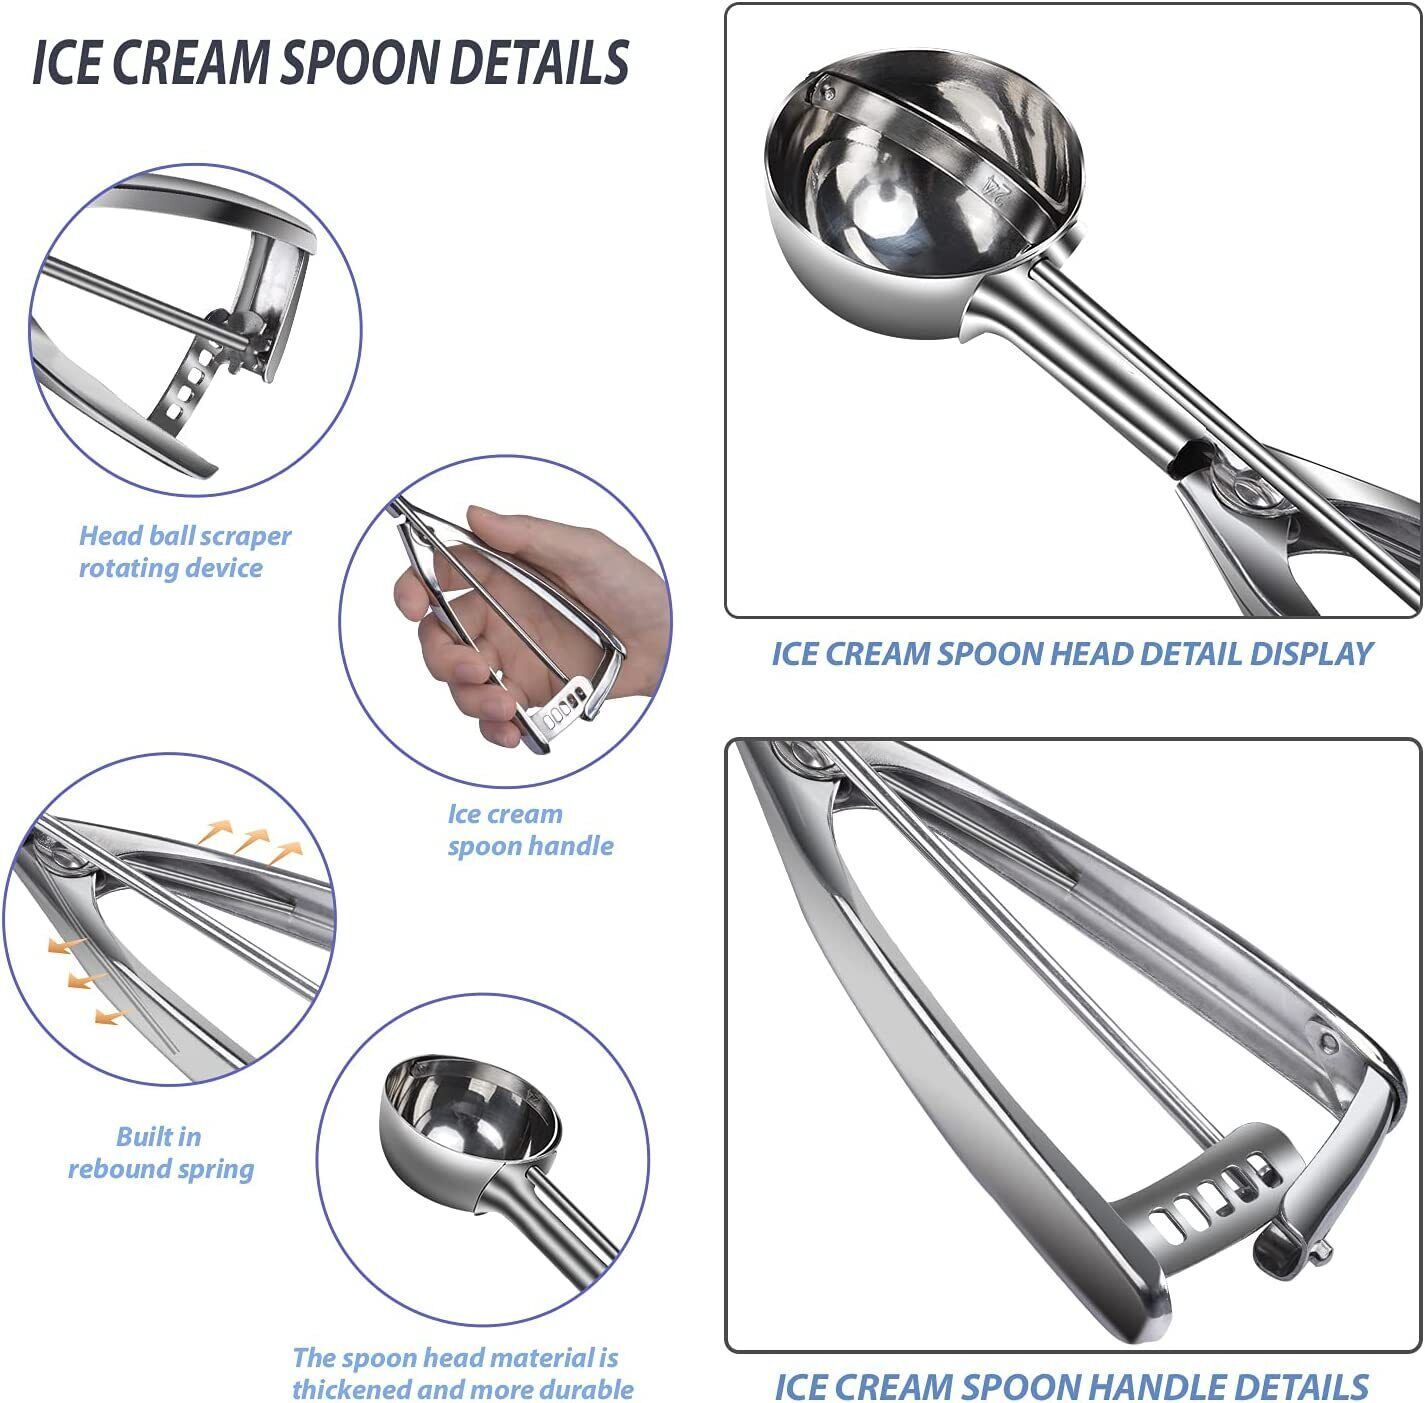 18/8 Stainless Steel Large Ice Cream Scoop Disher Melon Baller 4 Tablespoon